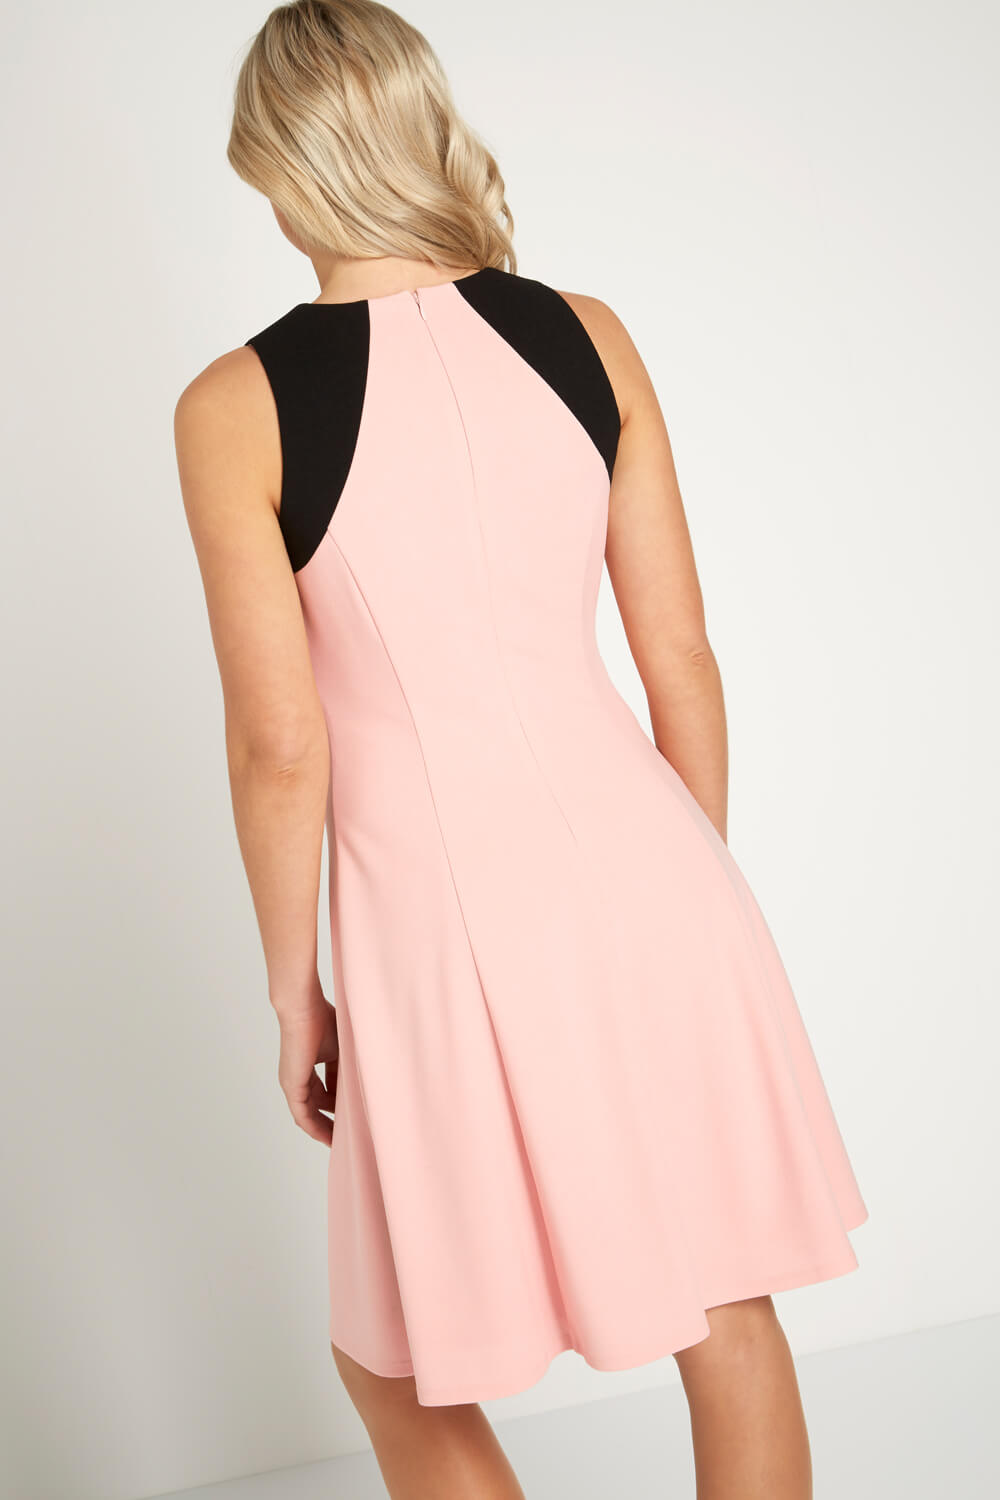 Light Pink Colour Block Fit and Flare Dress, Image 2 of 3